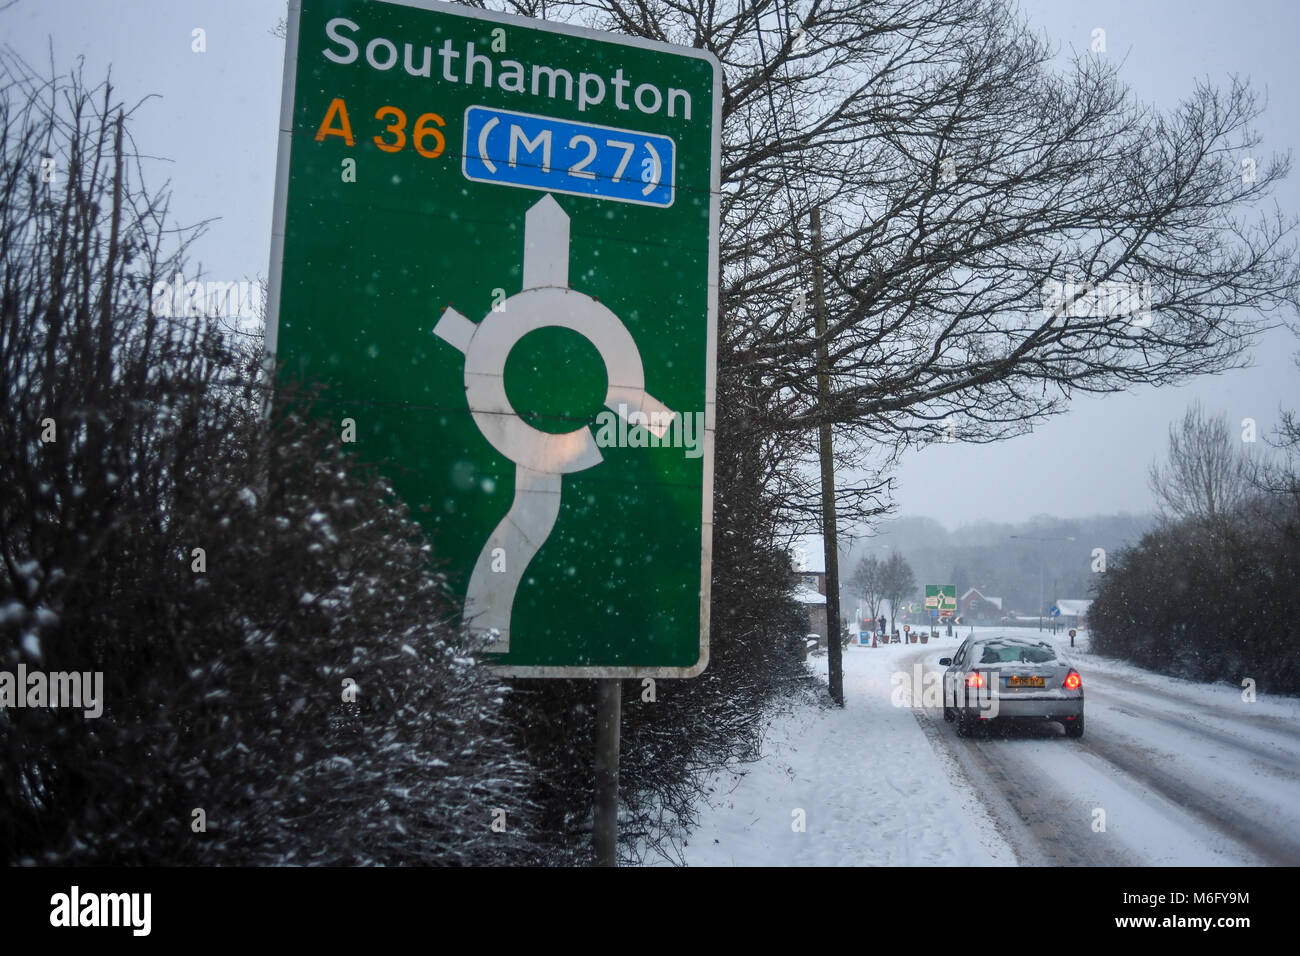 A36 traveling towards Southampton England heavy with snow causing travel disruption. Stock Photo